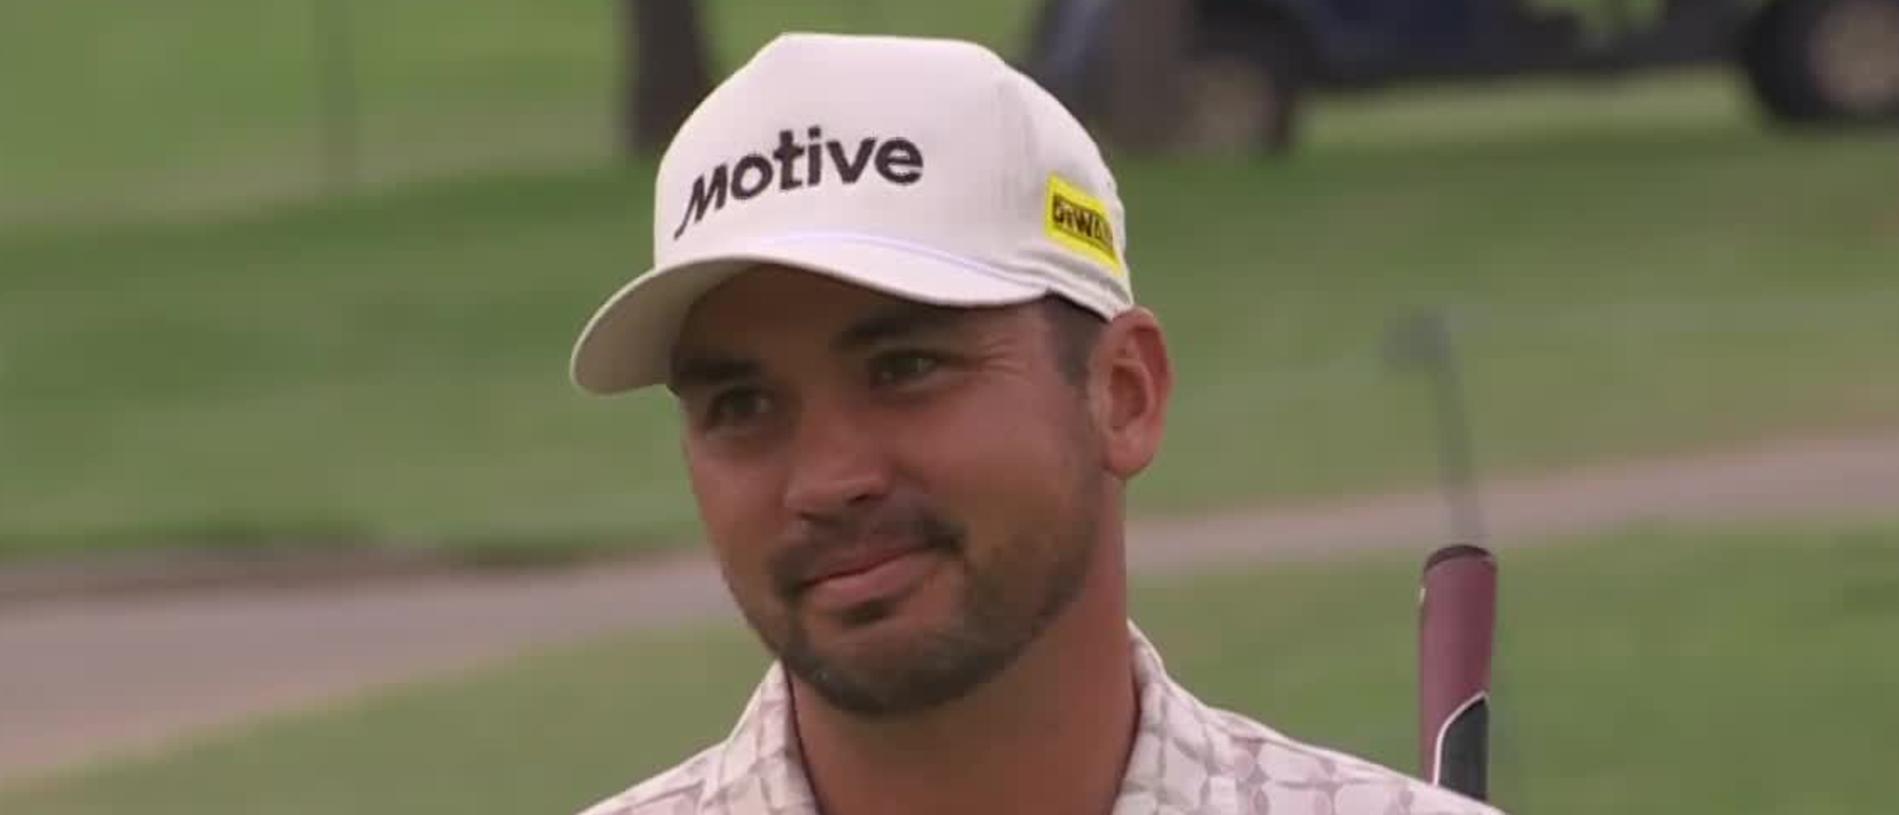 jASON dAY AFTER MAKING THE CUT